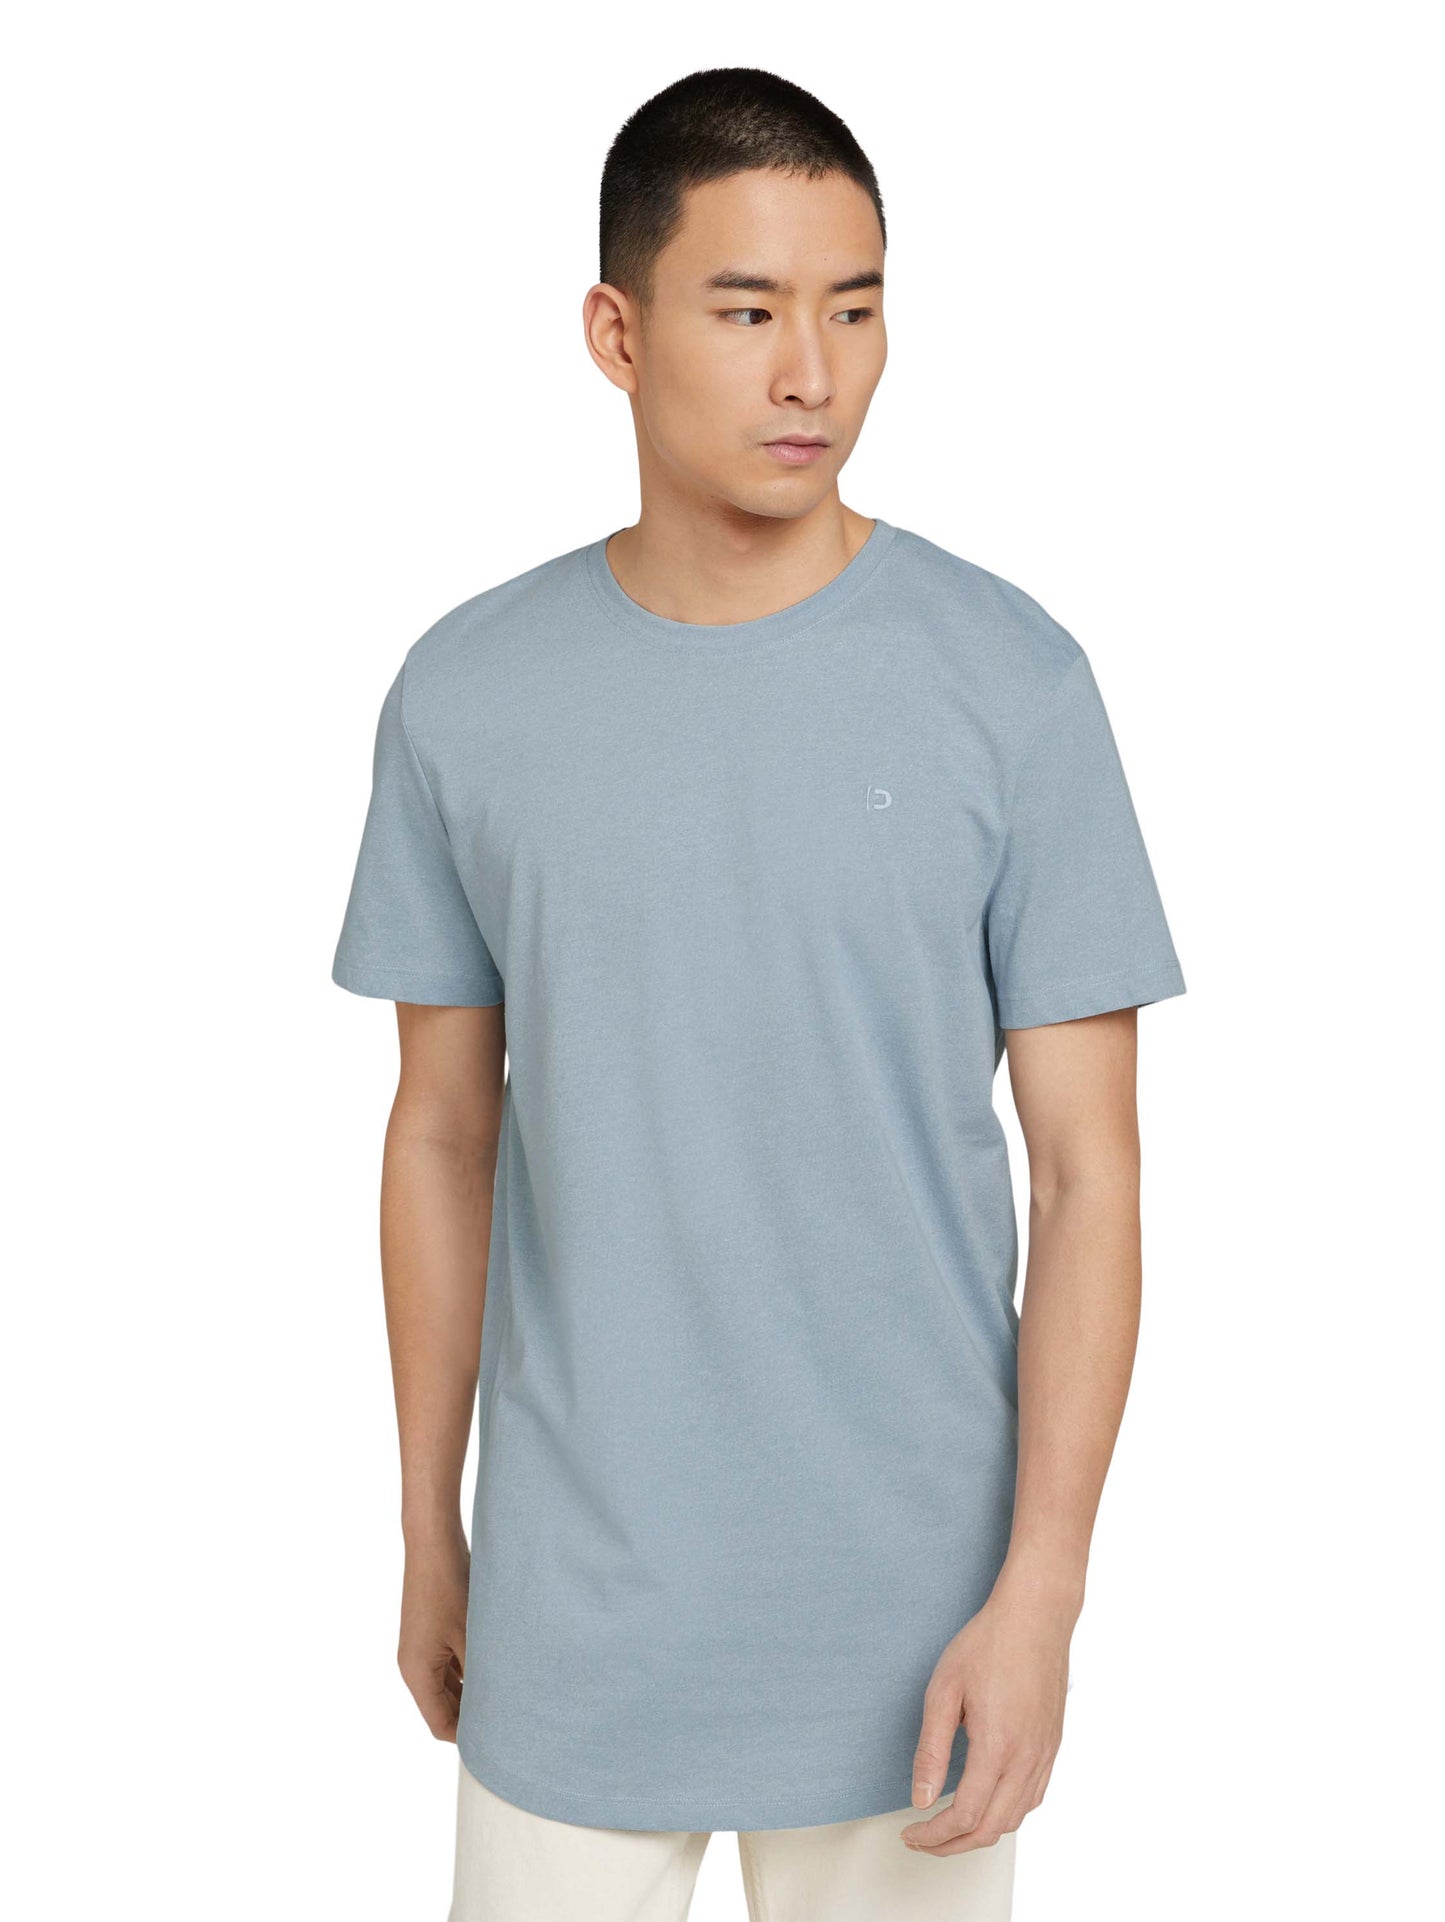 structured t-shirt (Foggy Blue Me )